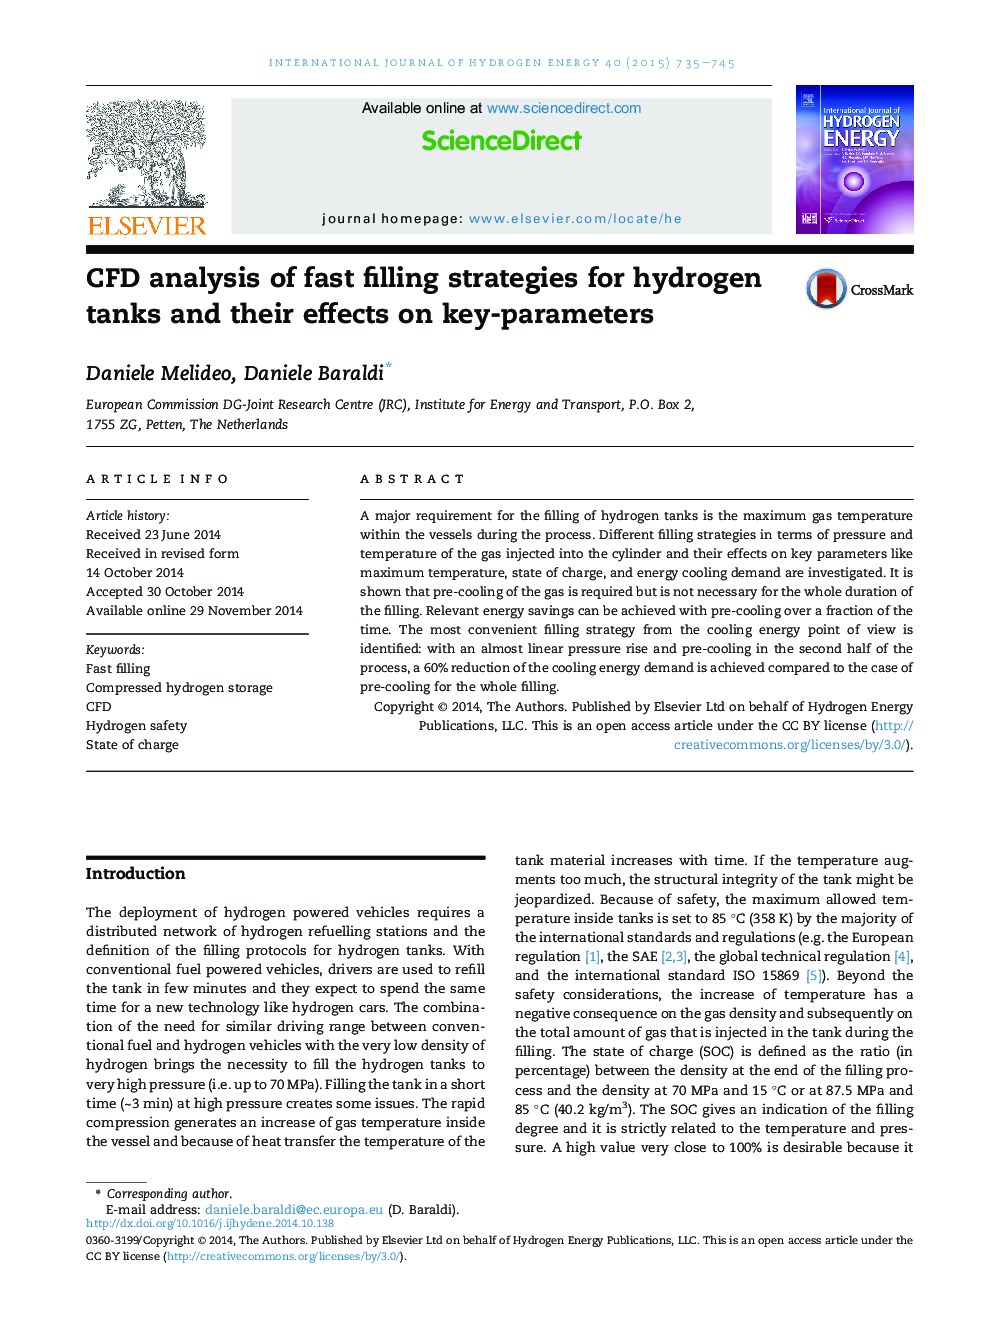 CFD analysis of fast filling strategies for hydrogen tanks and their effects on key-parameters